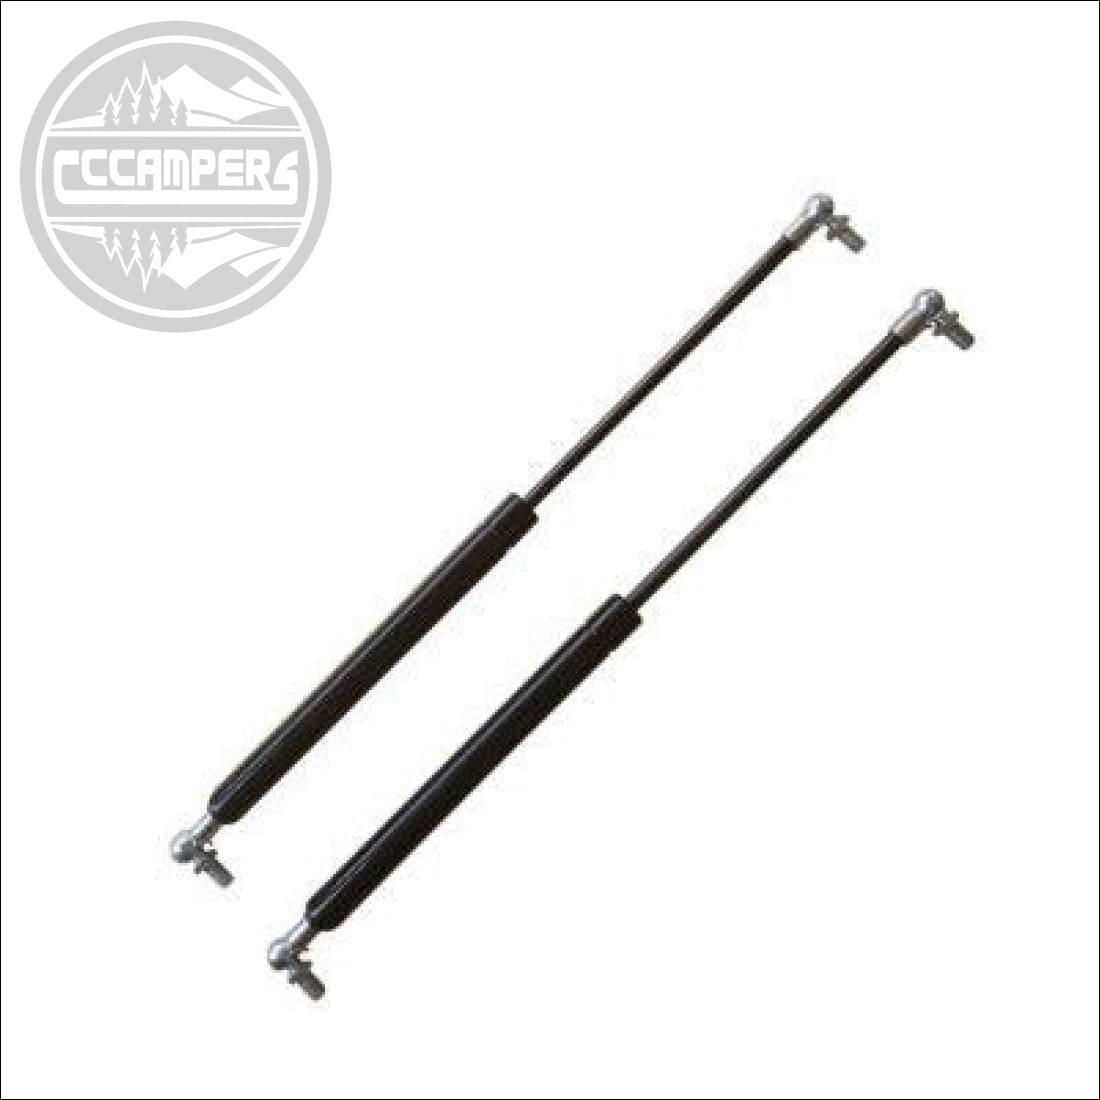 https://cdn.shopify.com/s/files/1/1349/2145/products/cccampers-pop-top-elevating-roof-gas-struts-other-services-free-weight-bar_865.jpg